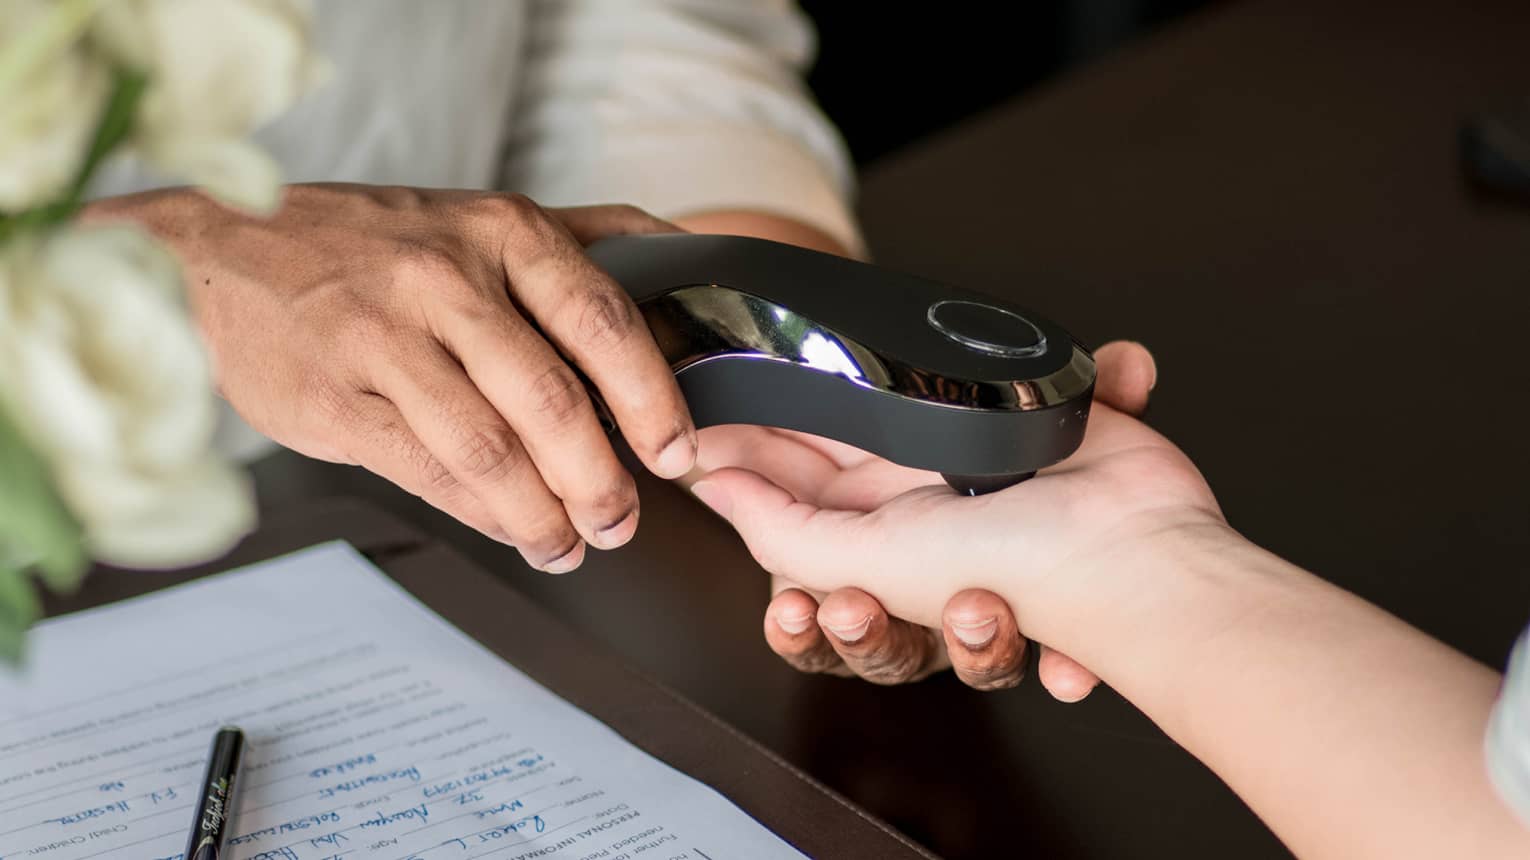 A person scans another's palm with a smooth, shiny, black electronic device beside a completed medical form on the table..